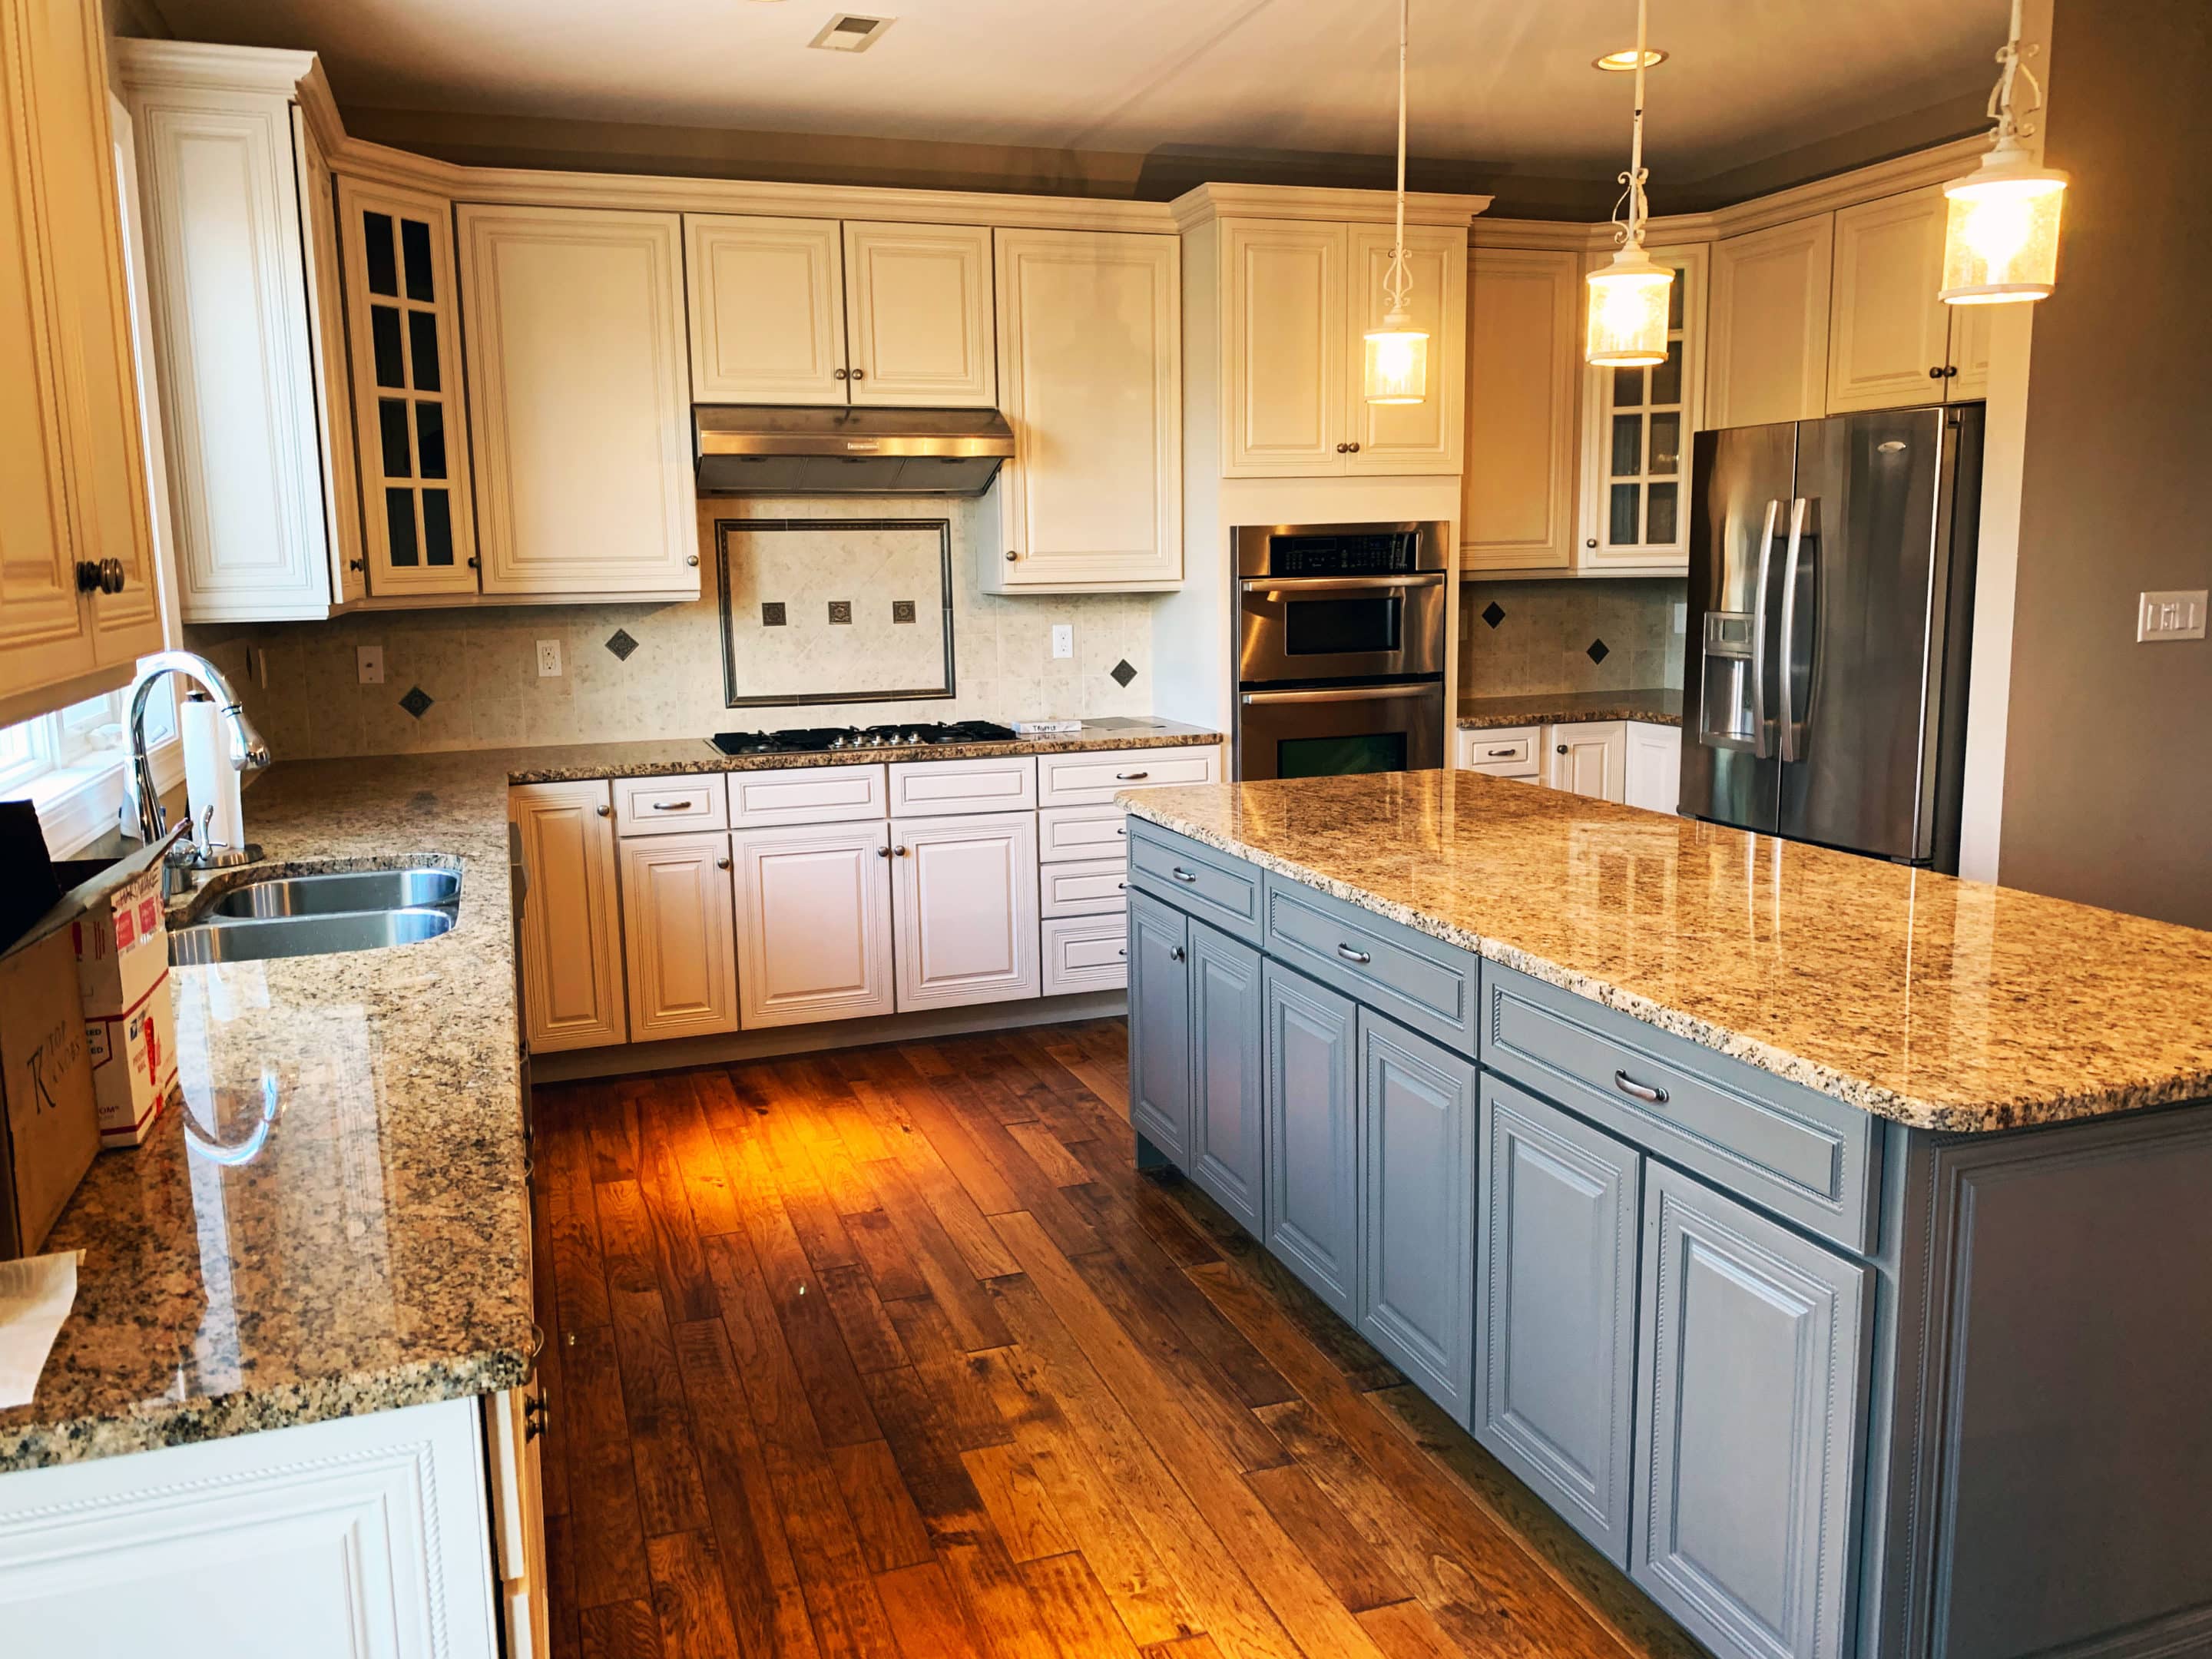 Maple Kitchen Cabinets Refinished to White with Organic Grey Island